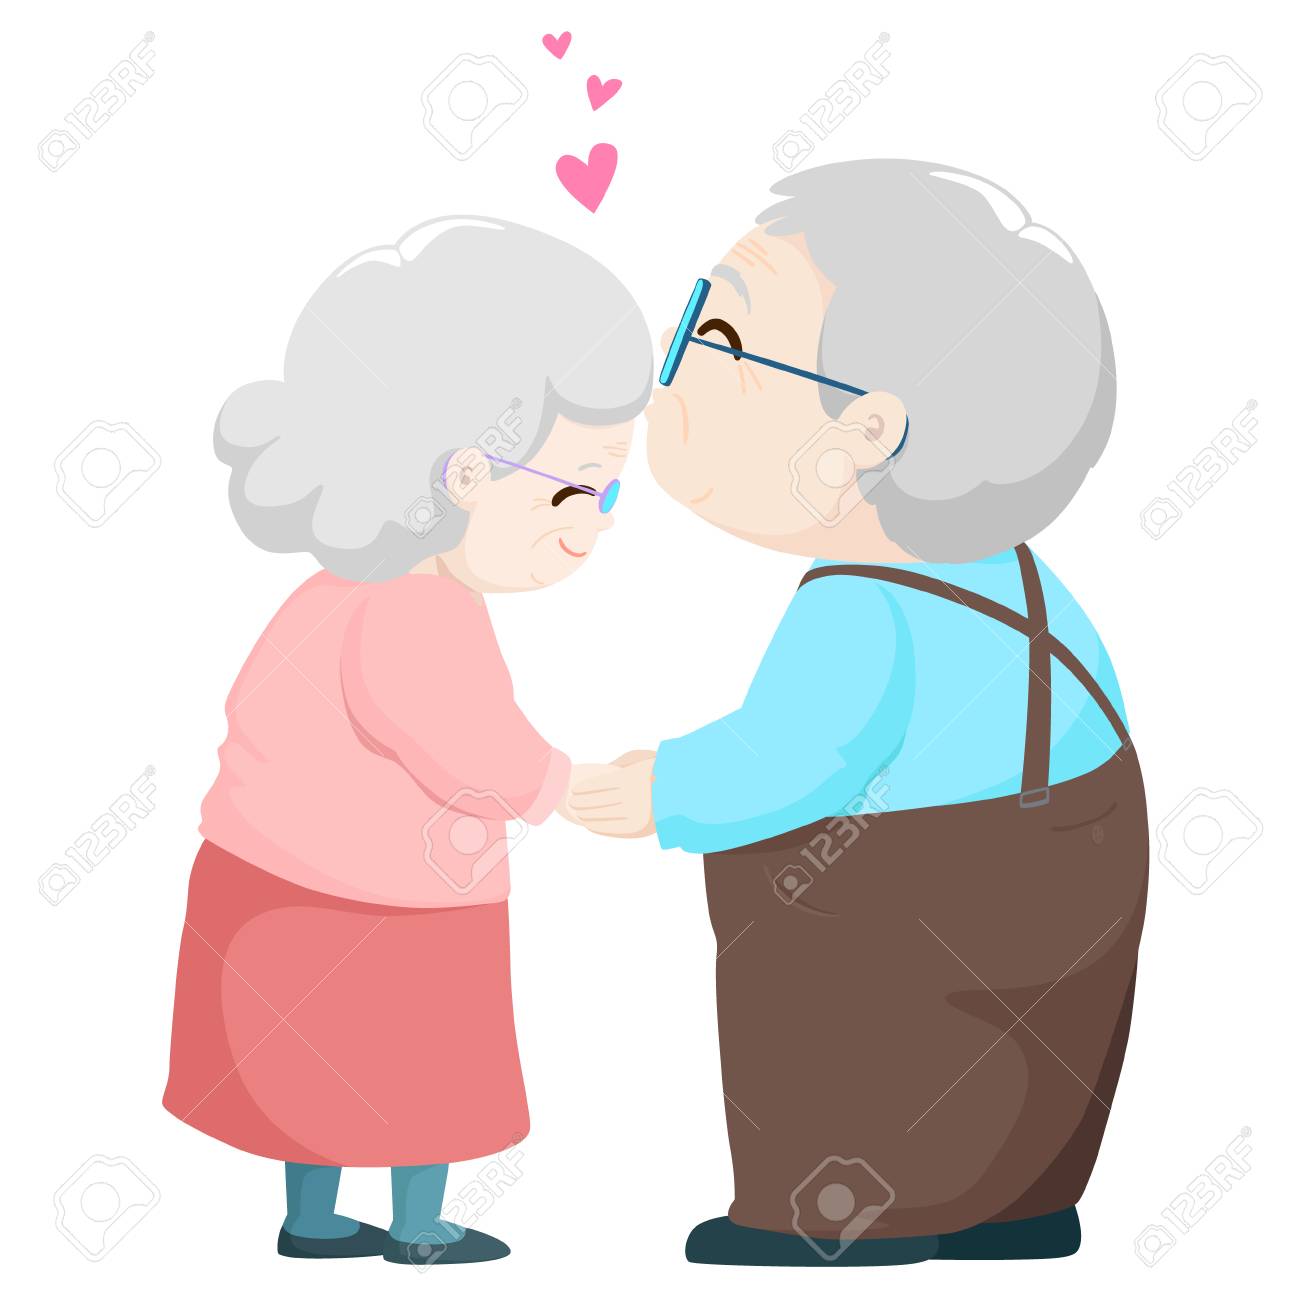 Old Couples Cartoon Images belly bulge